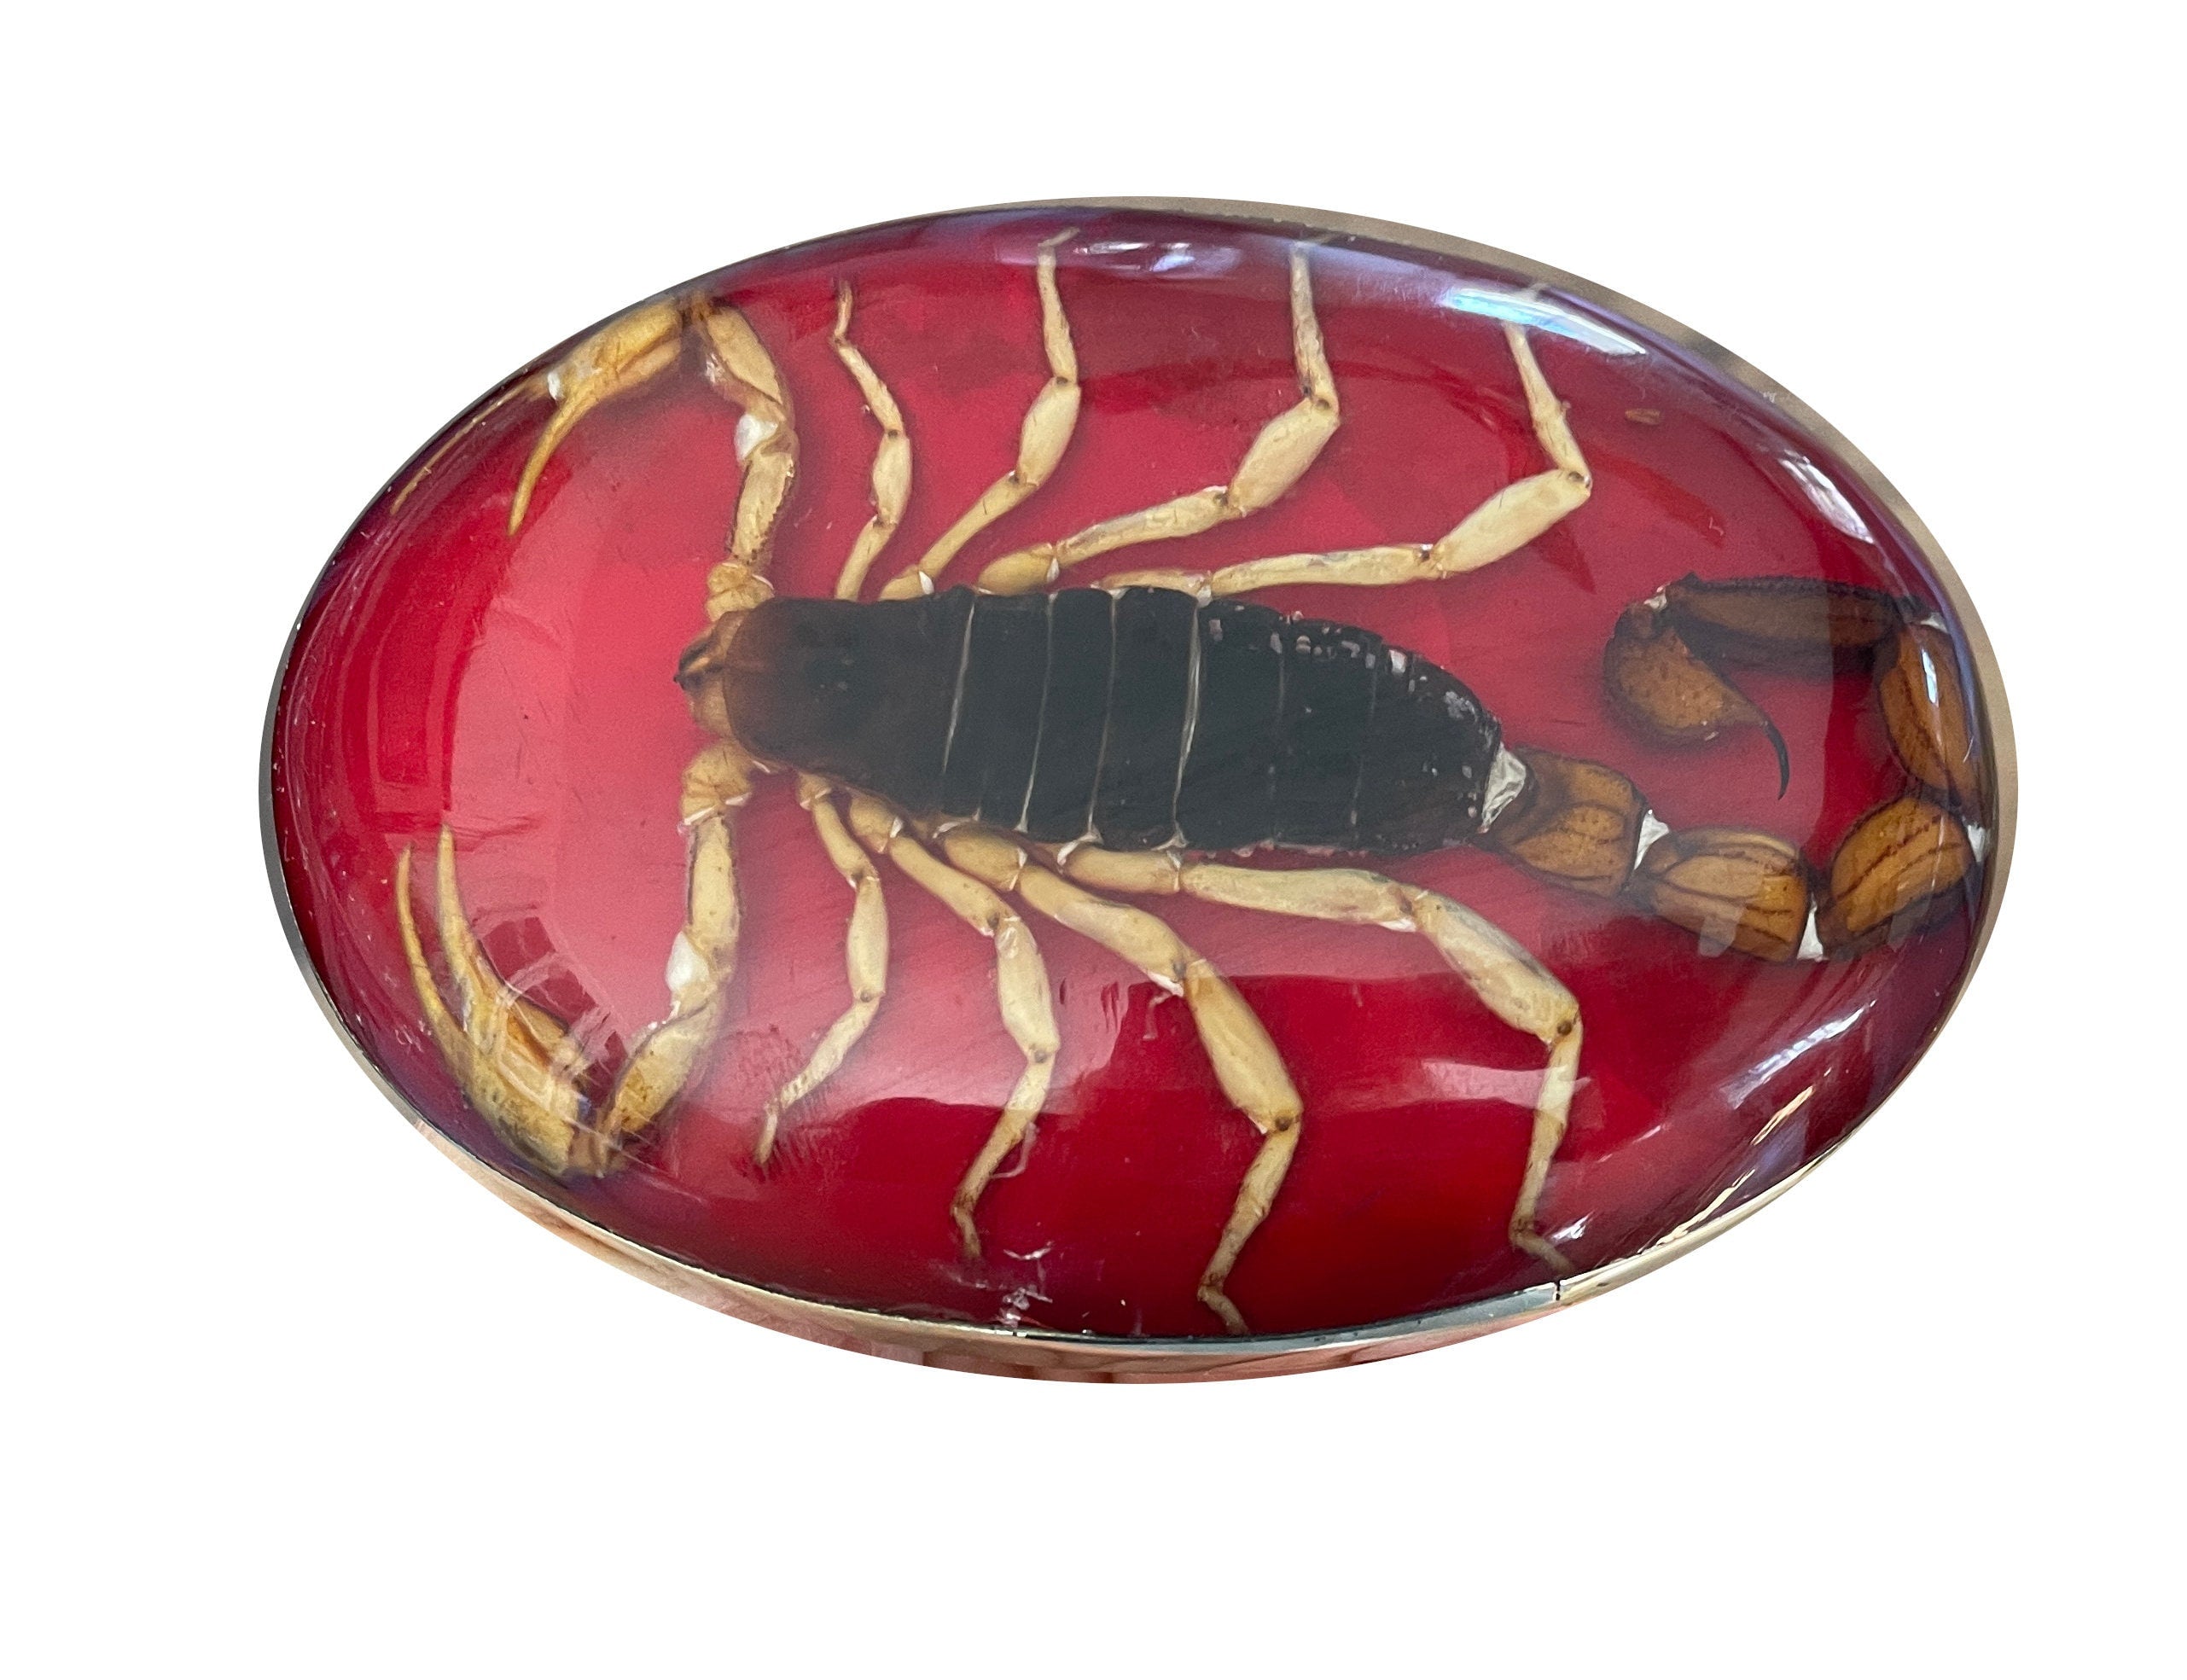 Real Scorpion Belt Buckle - Red